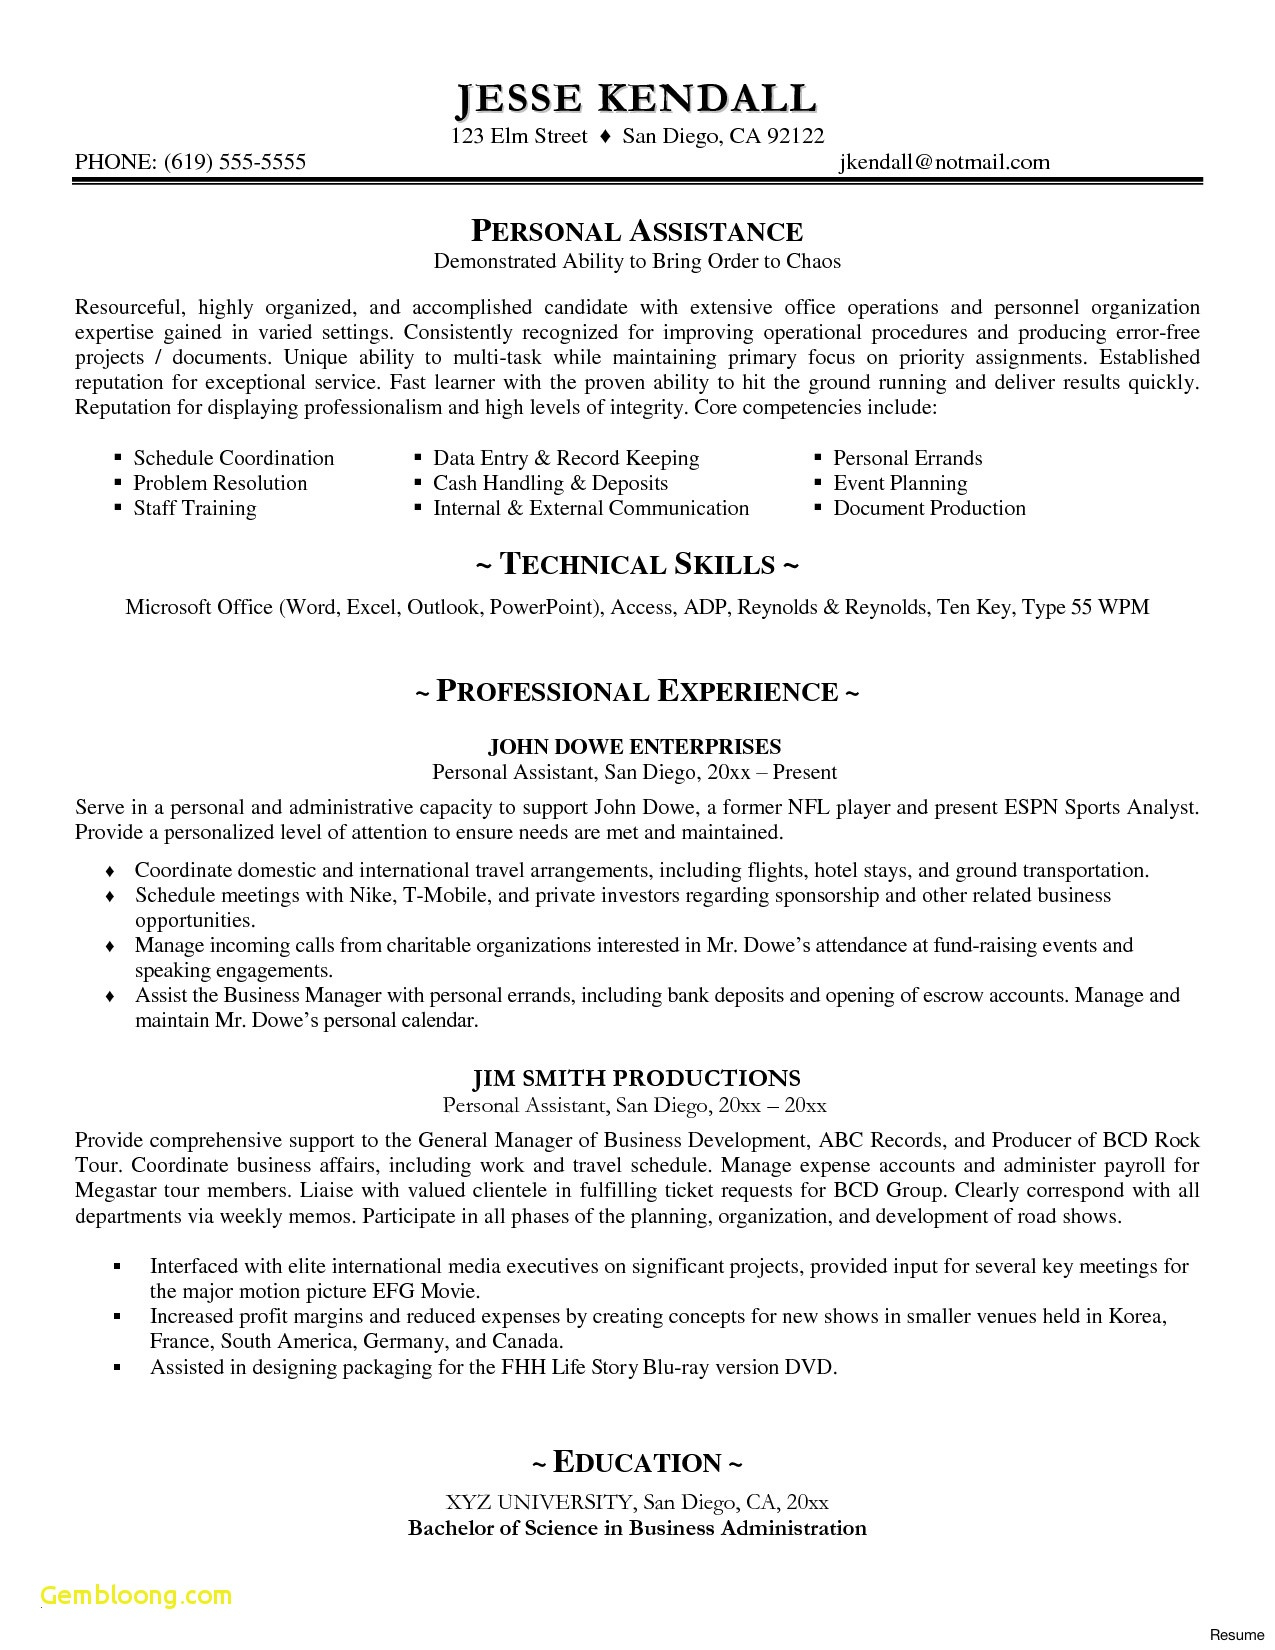 Cover Letter Template Download Doc - Word Resume Template Downloads Legalsocialmobilitypartnership